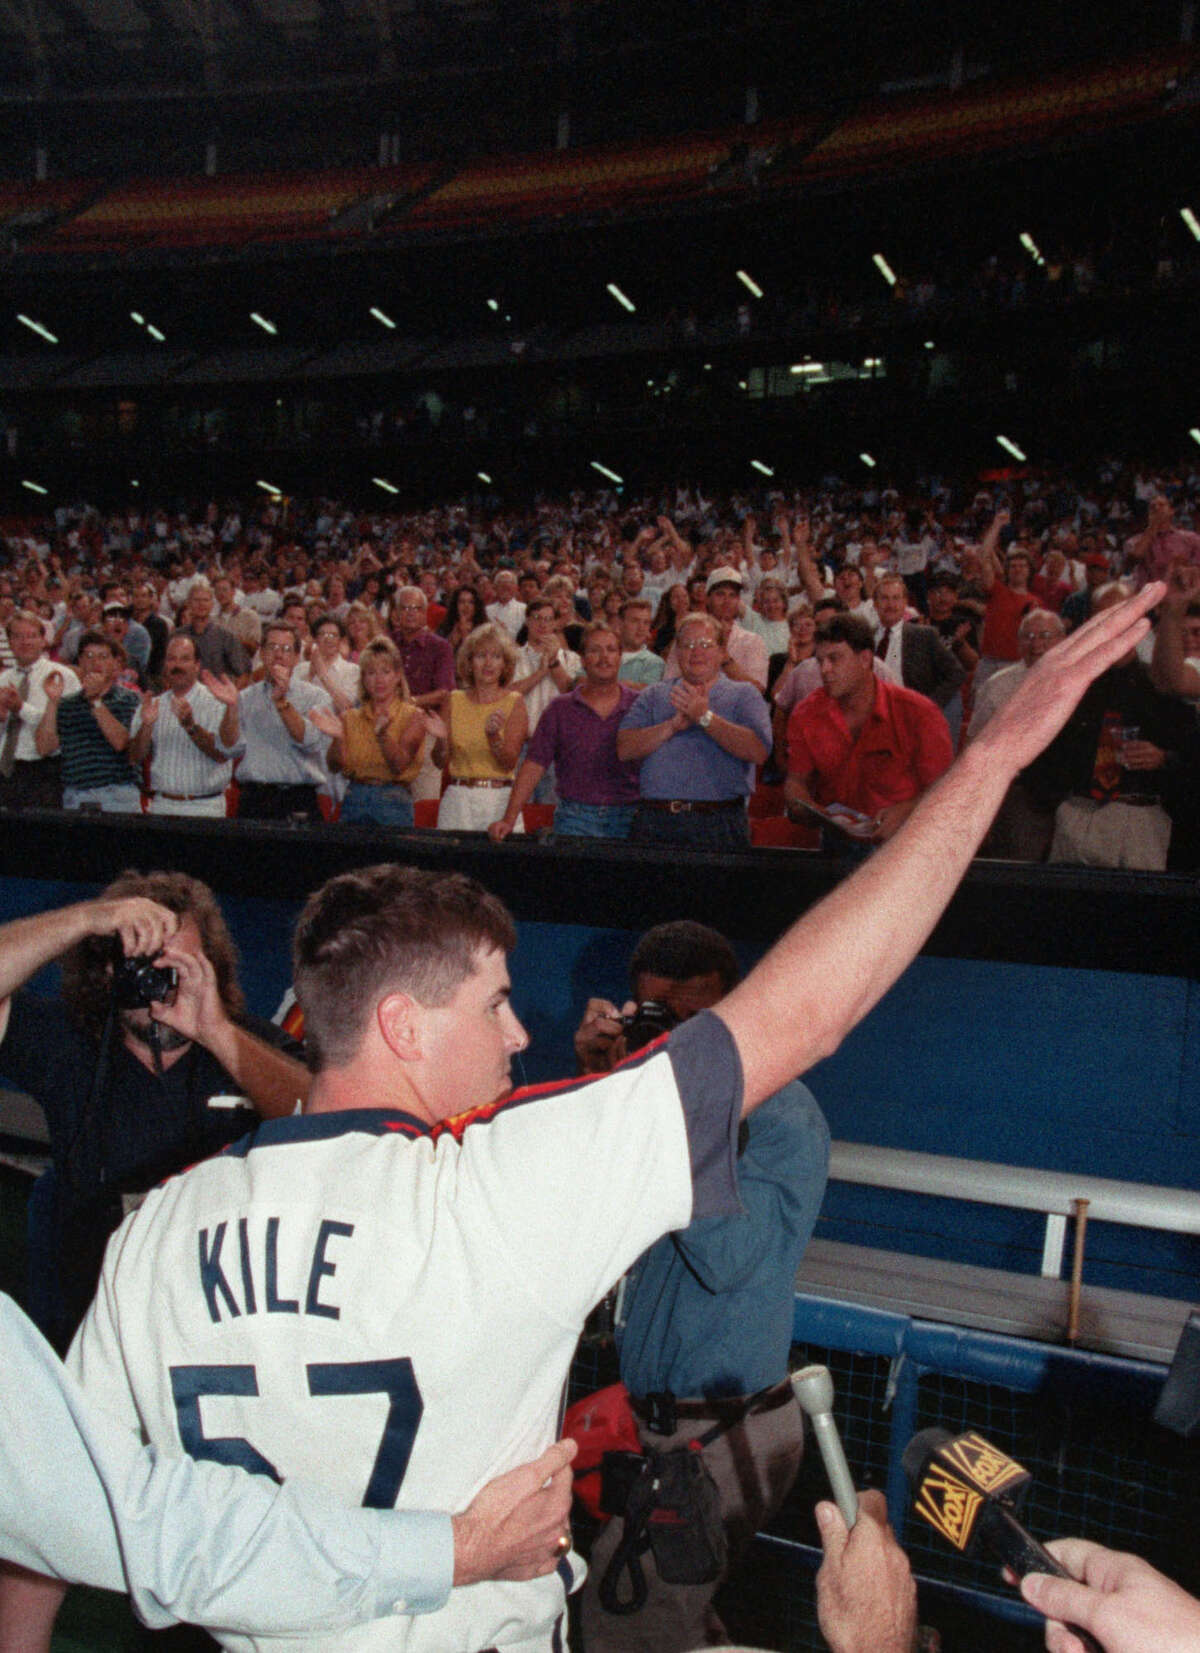 09/08/1993 -- Astros' Darryl Kile acknowledges applause from fans at the Astrodome 9/8/1993 after he pitched a no-hitter against the New York Mets.